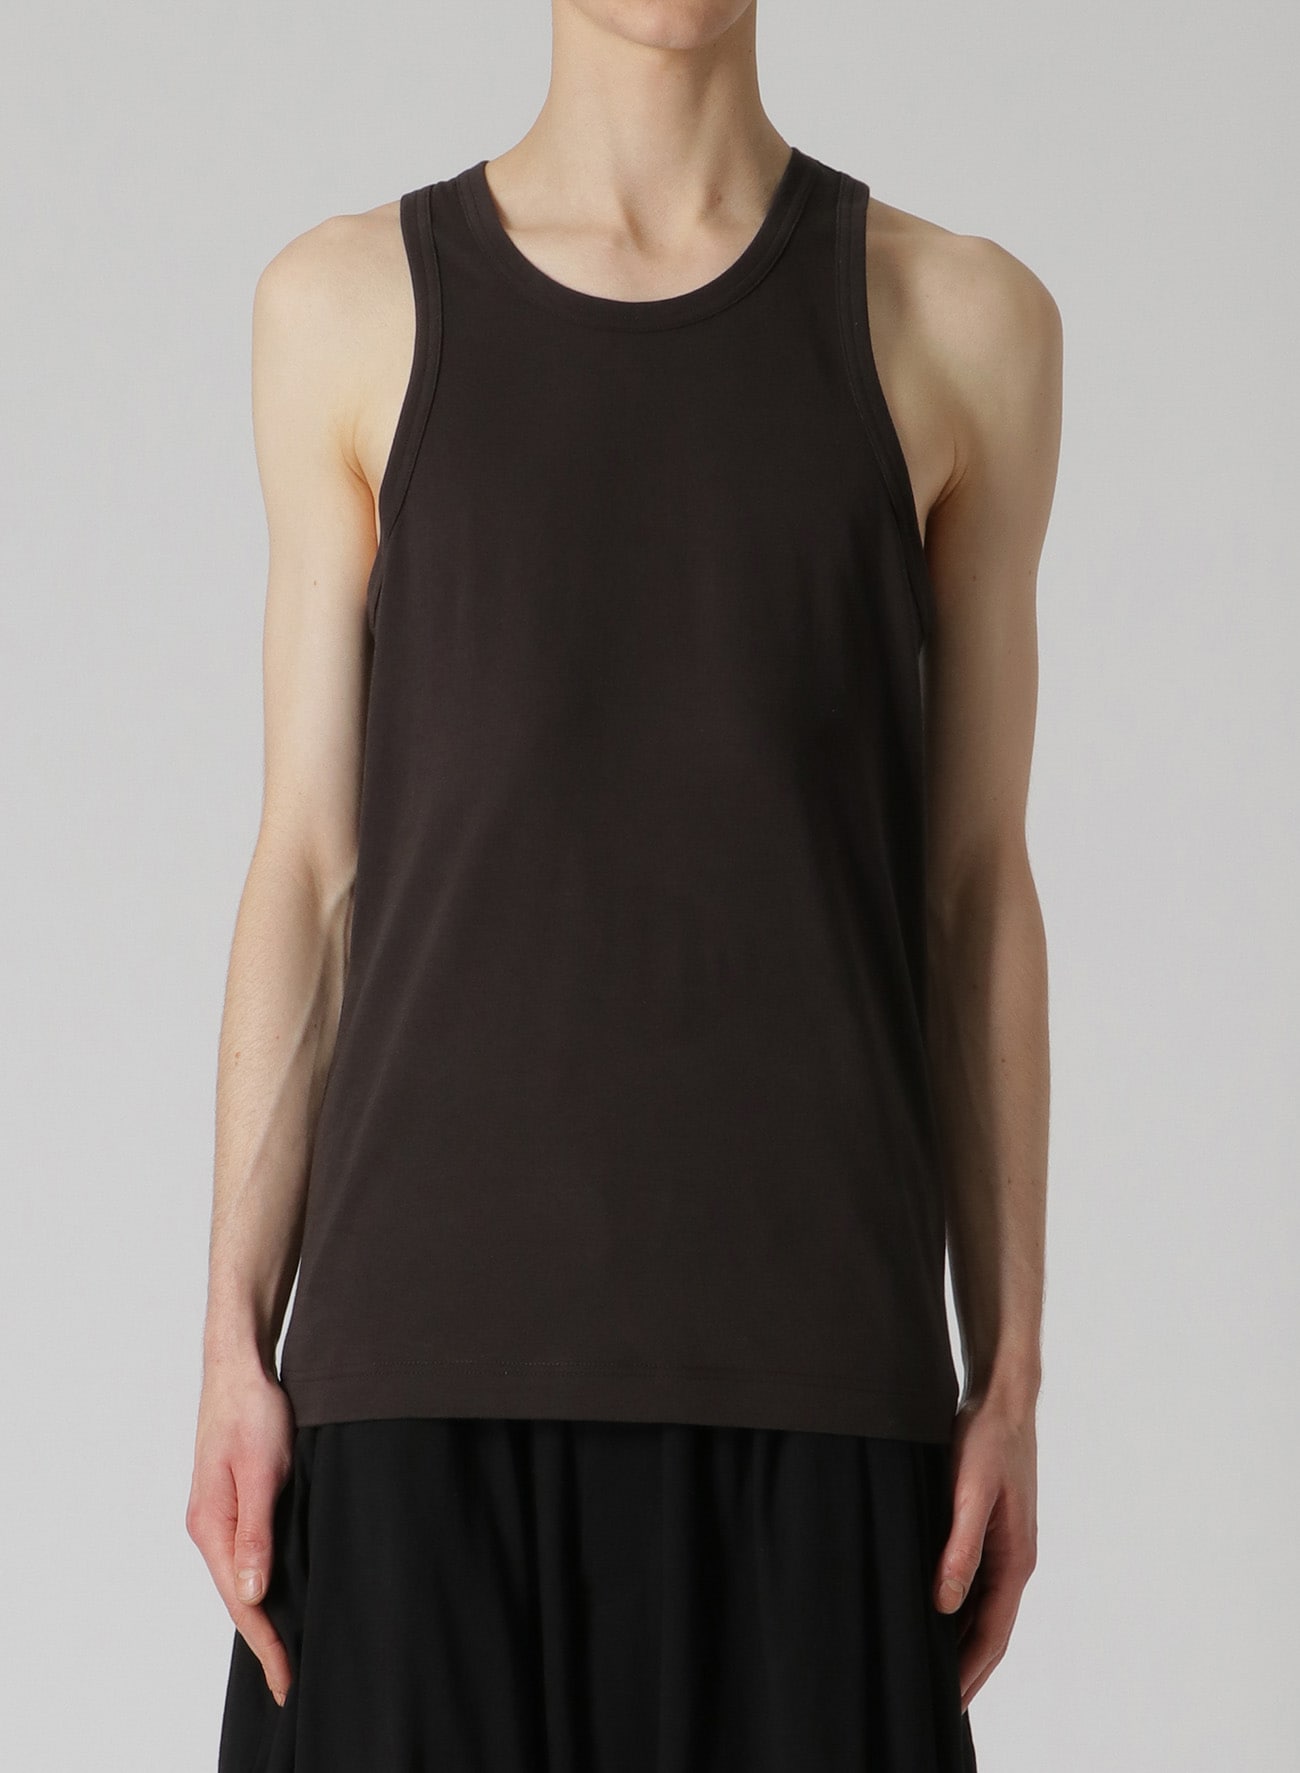 Looking for similar length tanks/sleeveless shirts from other